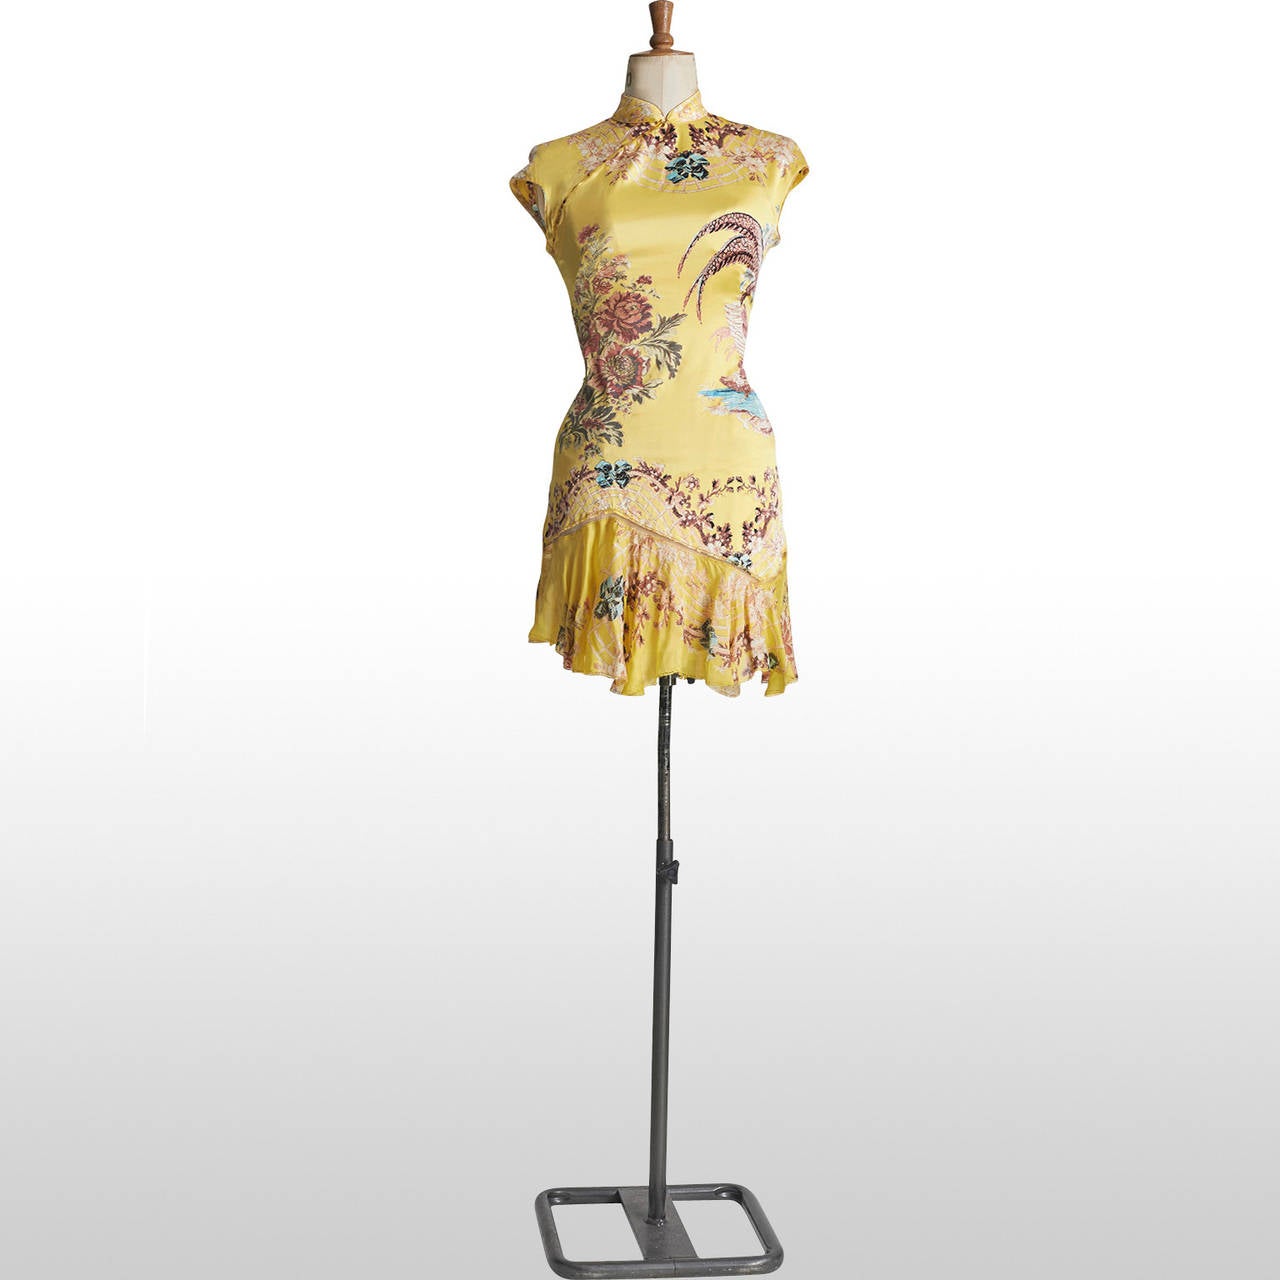 A Roberto Cavalli dress with Chinese flowers and  shimmering canaries encircling them is depicted against the yellow silk base of the fabric. The dress accentuates fine detailing as it features a built-in corset, gold hints of glitter on the flowers